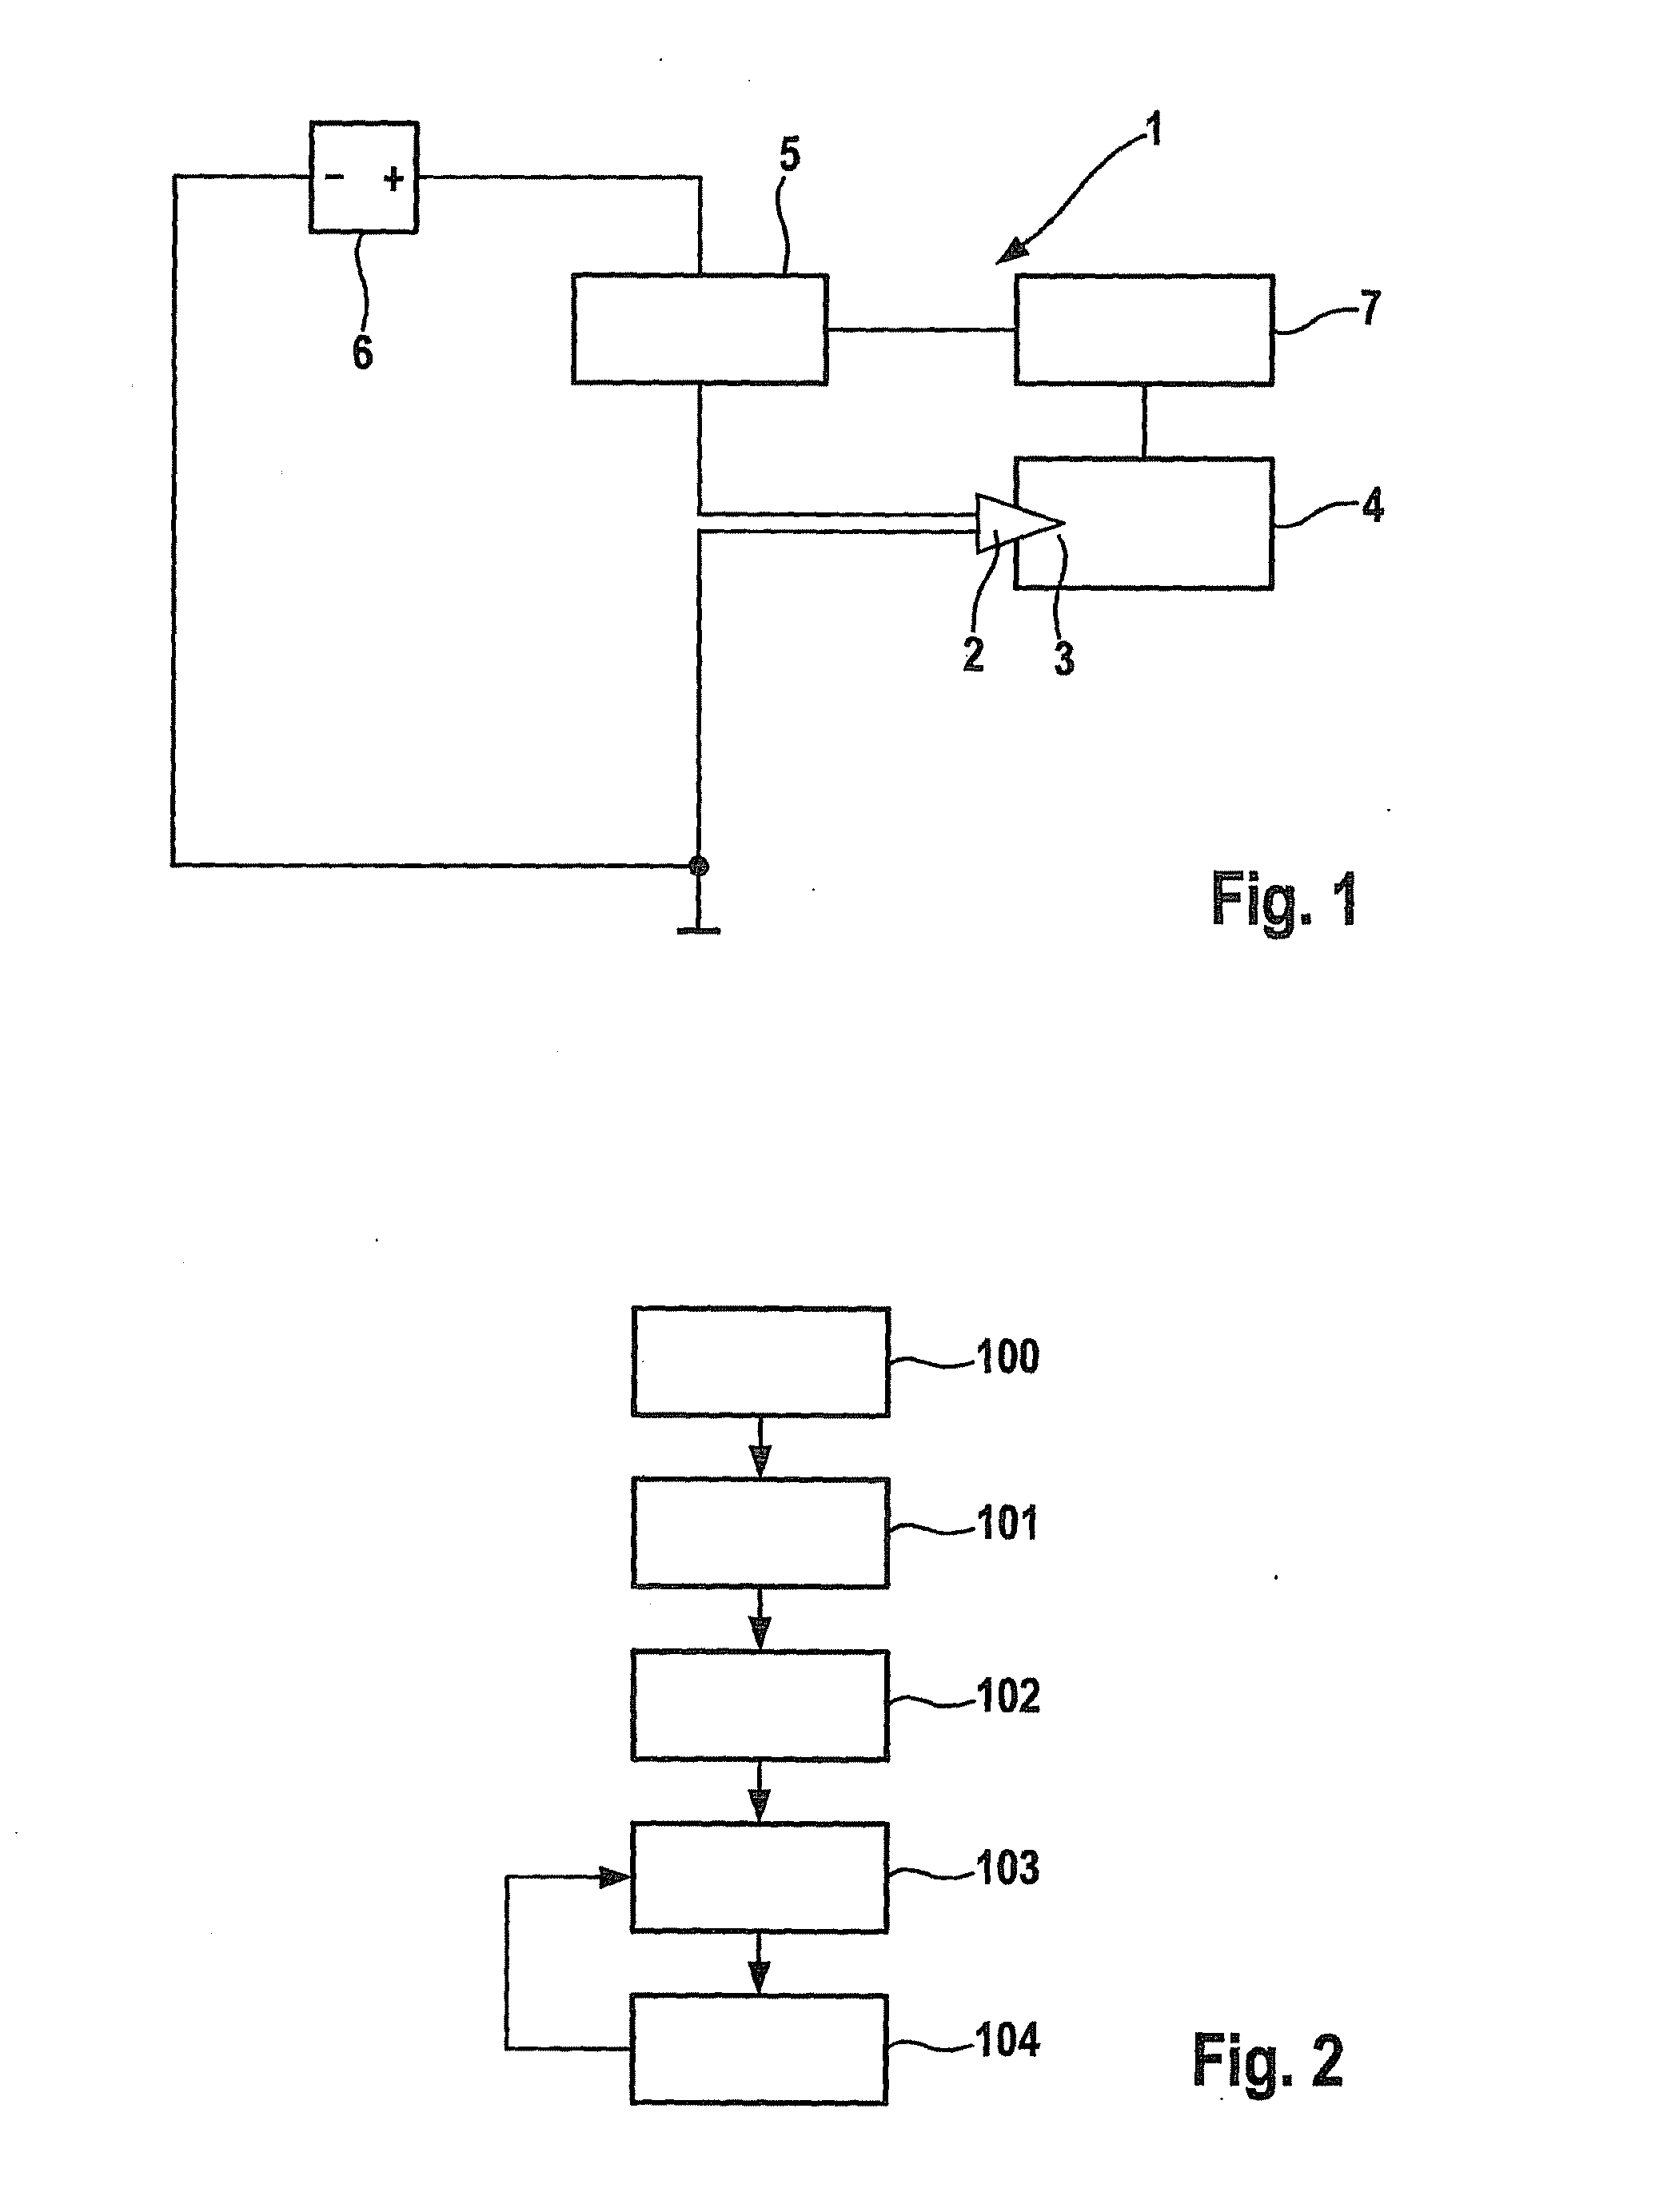 Method for Regulating or Controlling the Temperature of a Sheathed-Element Glow Plug